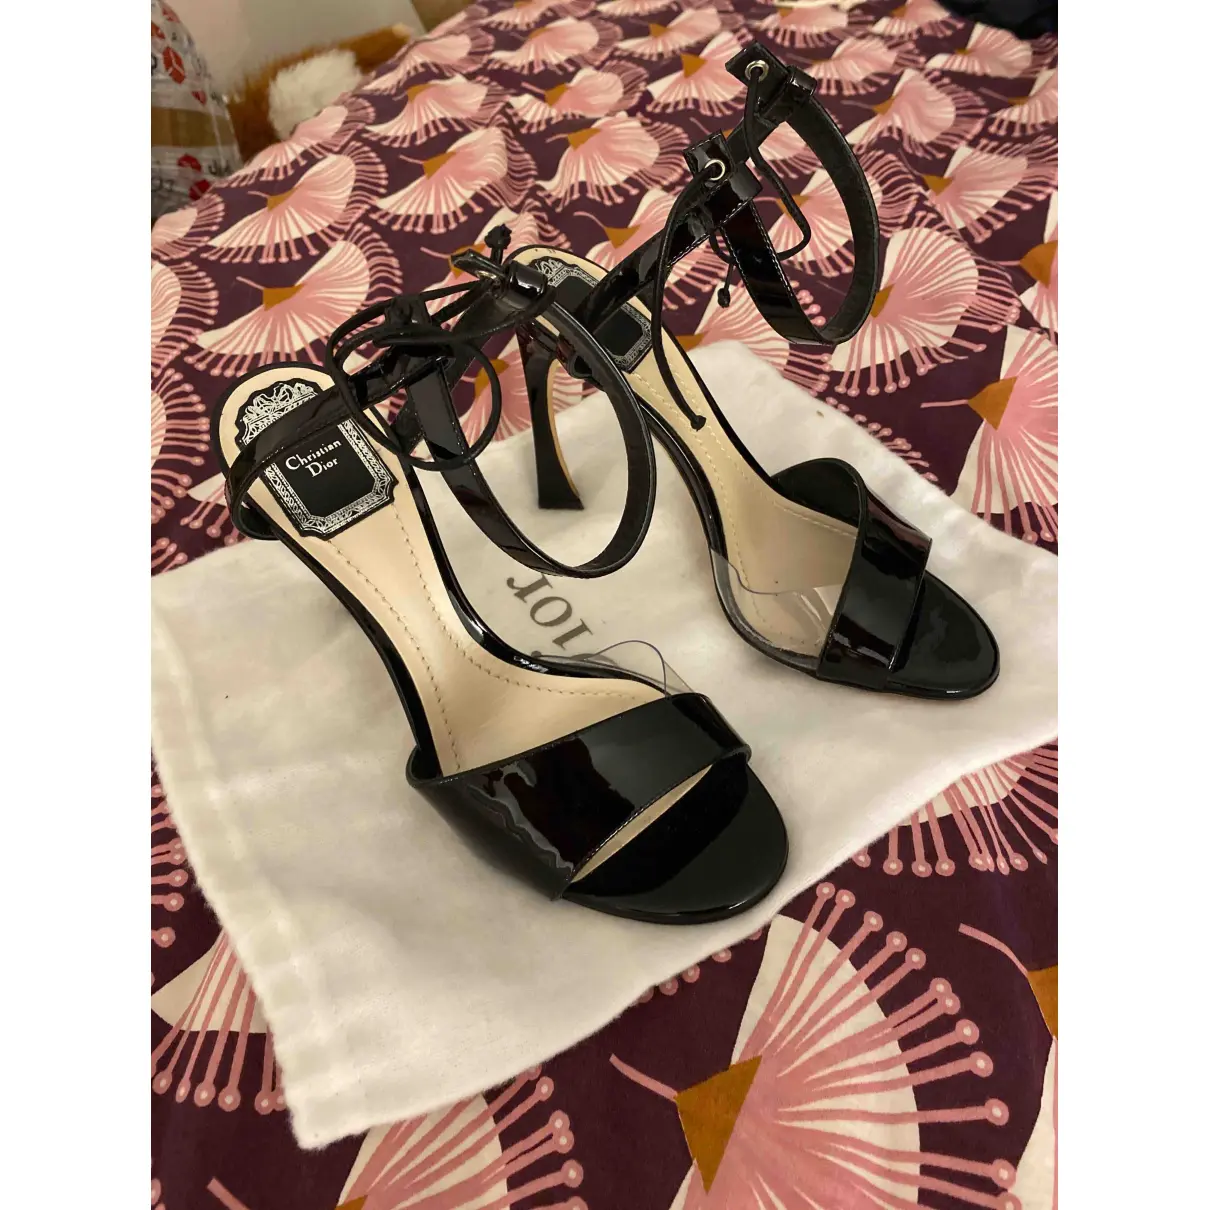 Buy Dior Patent leather sandals online